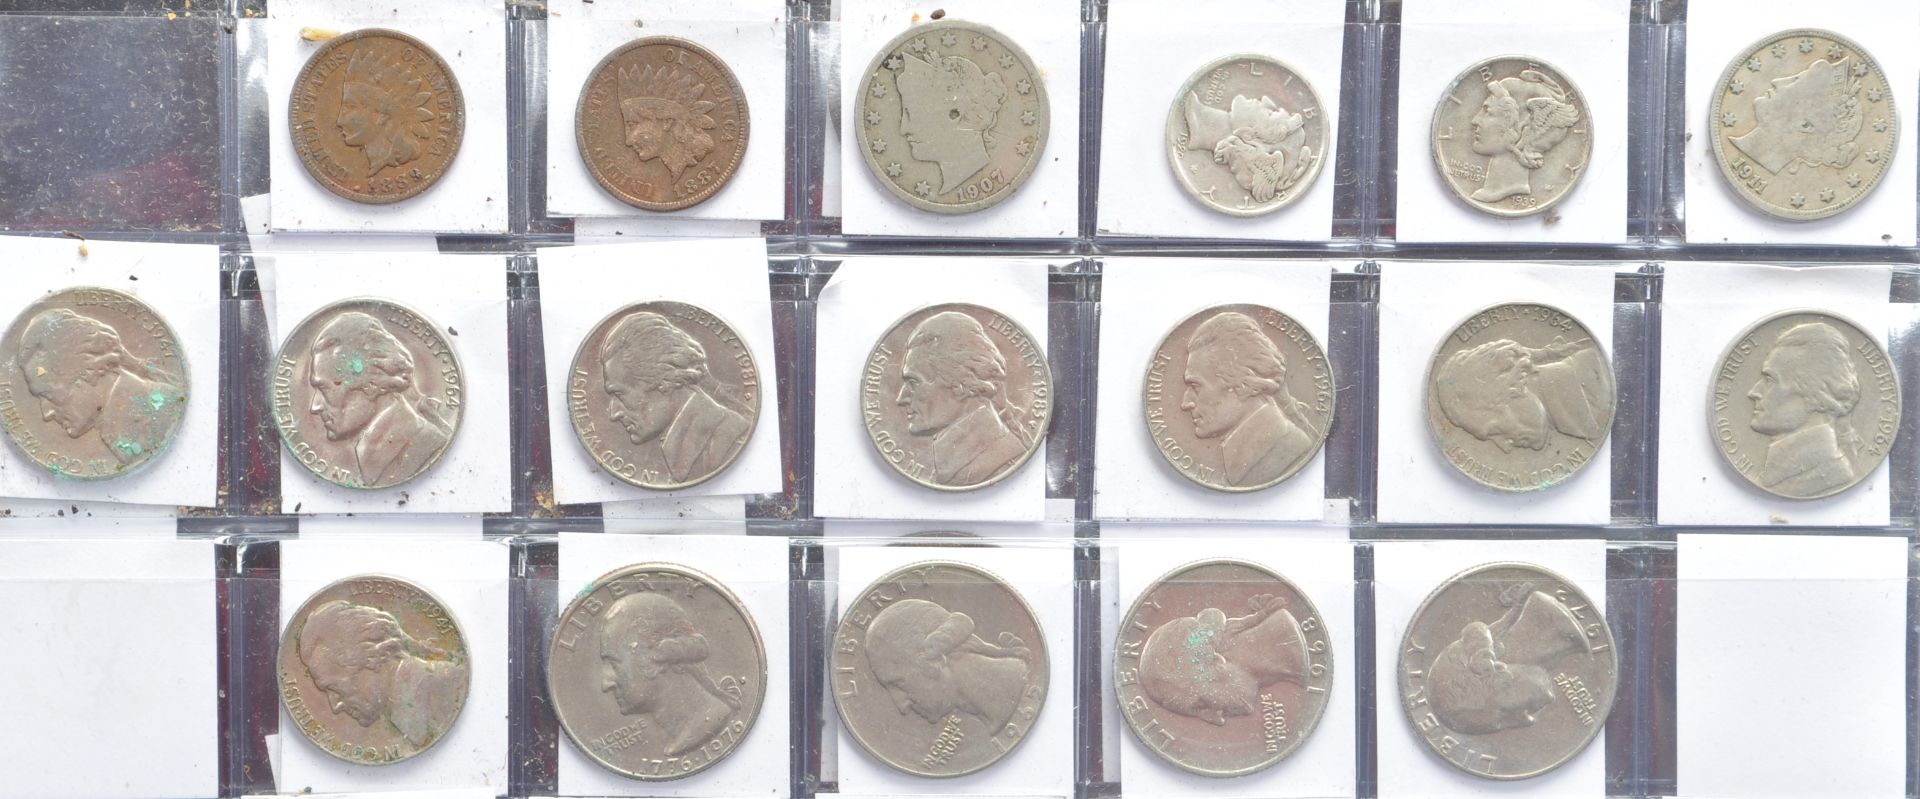 COINS - LARGE COLLECTION OF EARLY 20TH CENTURY COINS - Image 8 of 8